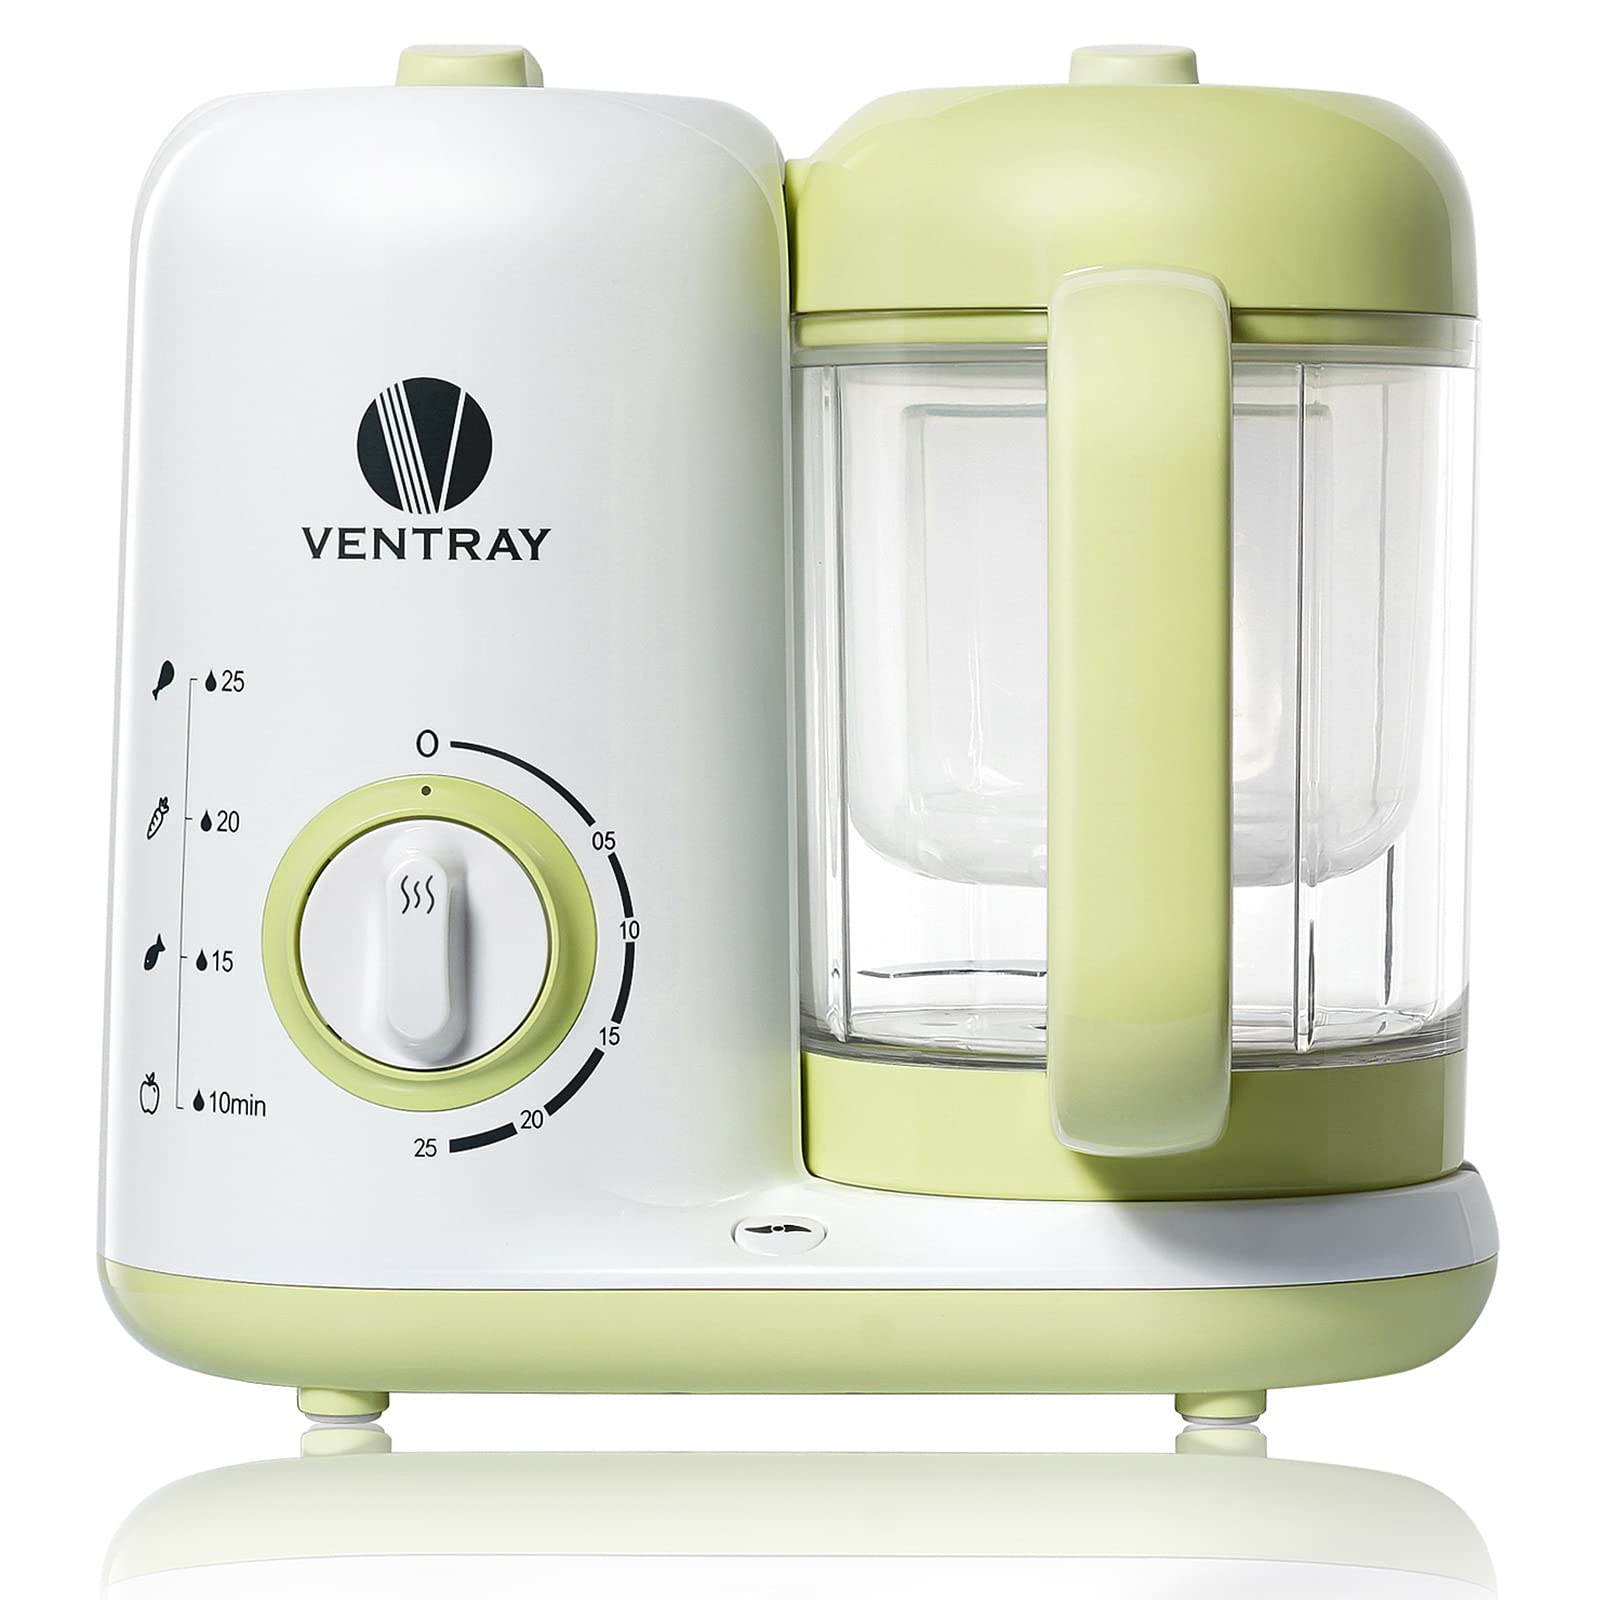 Ventray Baby Food Maker, Puree Food Processor Steamer Blender cooker Warmer Machine for Toddlers Baby, All-in-one Auto cooking E